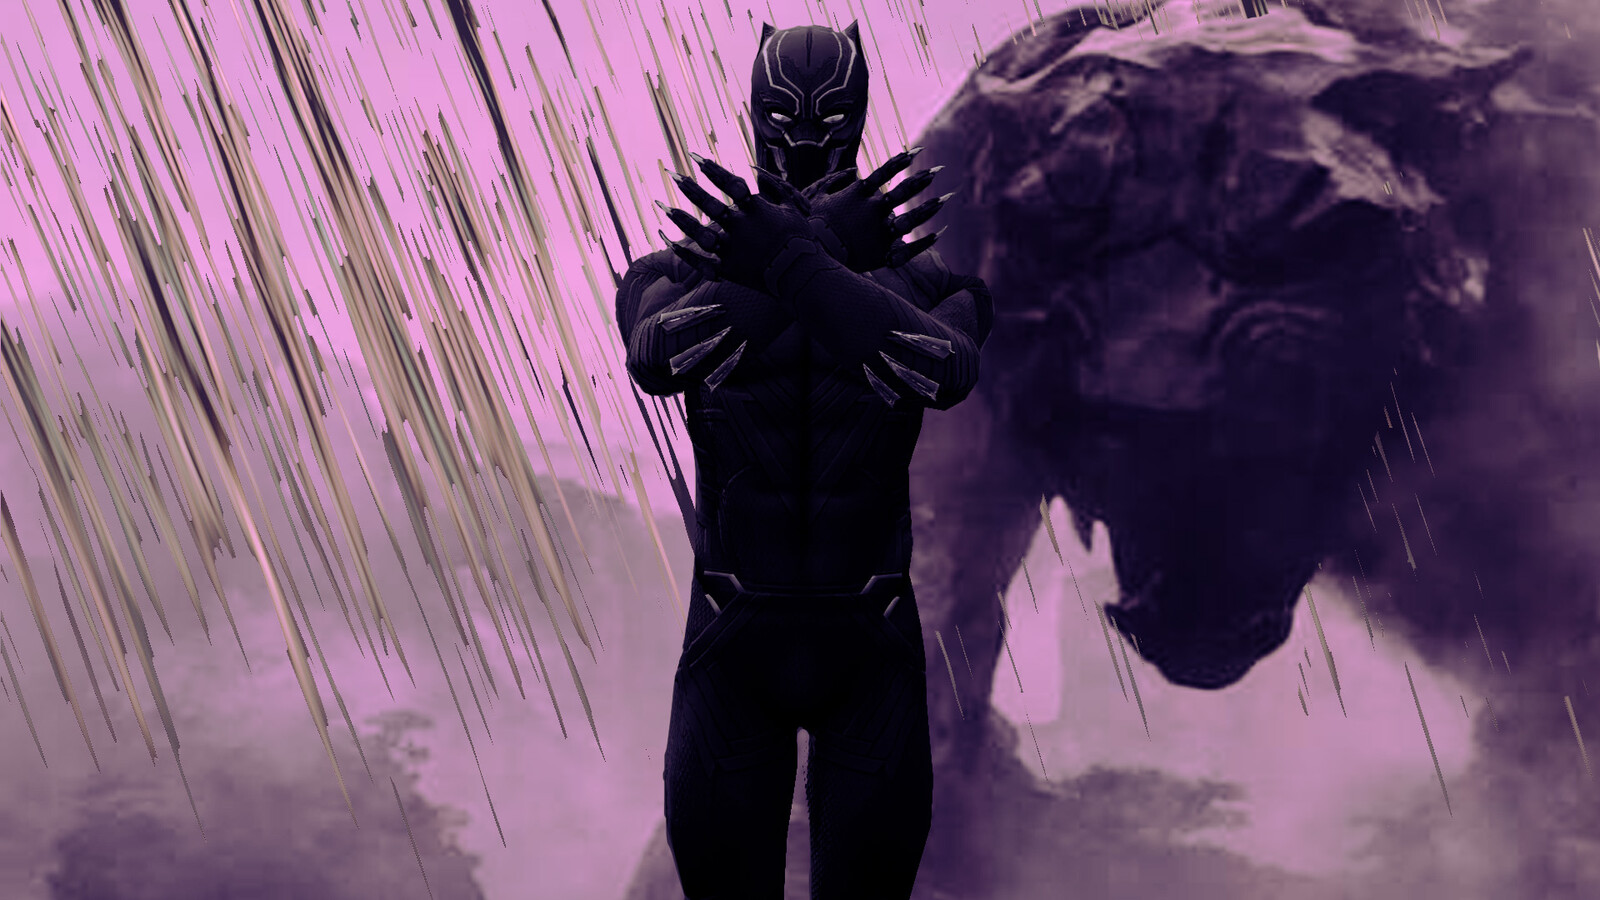 My black Panther poster.